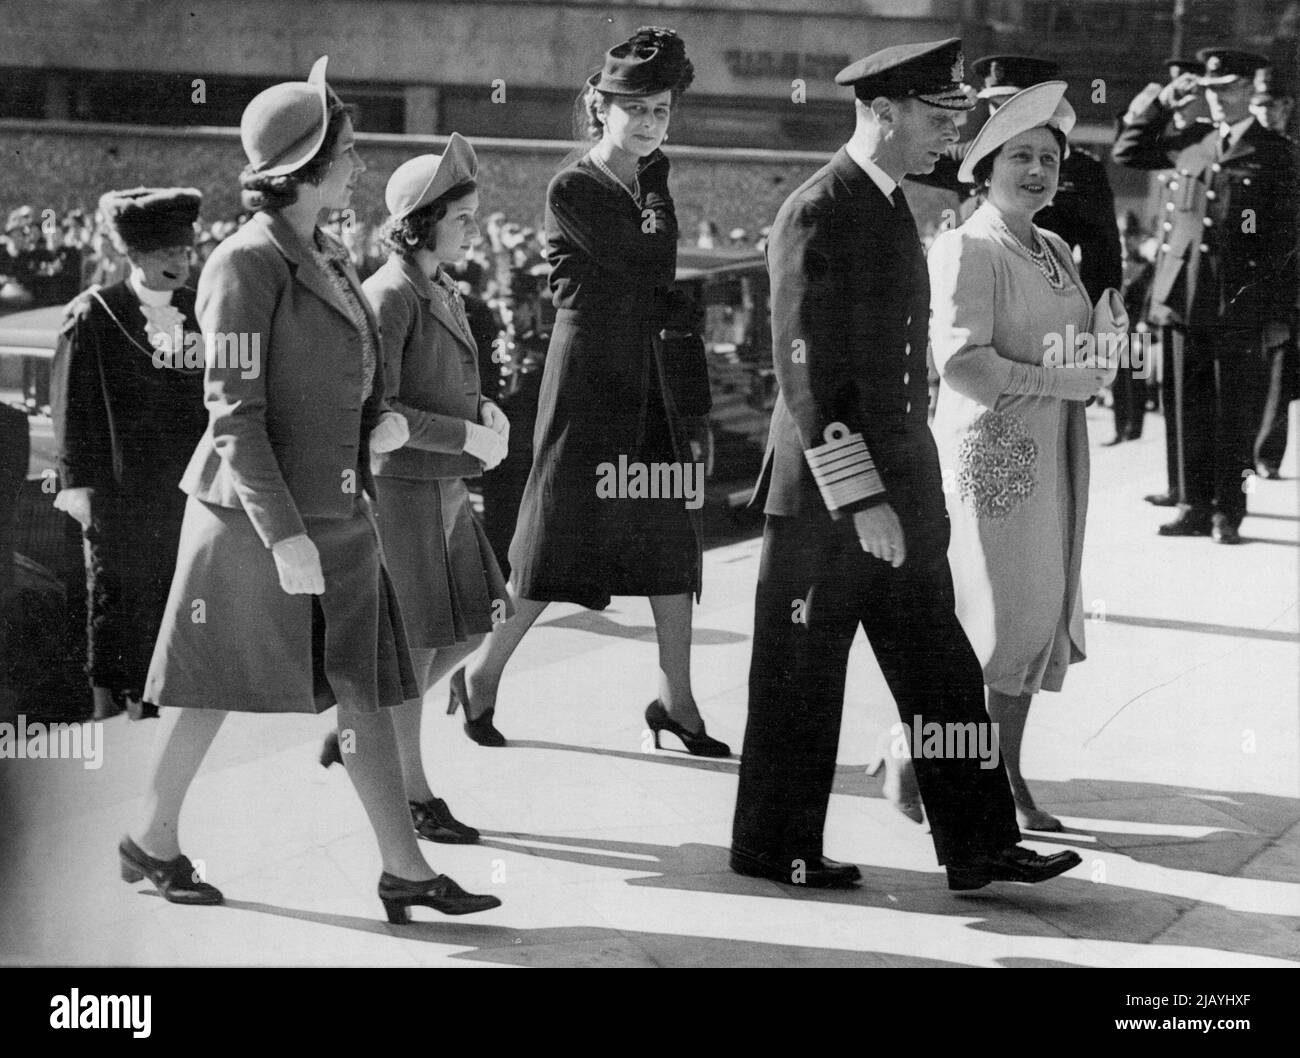 Royal Family Attend Thanksgiving Service At St. Pauls Cathedral -- The King and Queen with Princess Elizabeth, Princess Margaret Rose and the Duchess of Kent arriving for the service. The King and Queen, accompanied by the Princesses, attended a Thanksgiving Service for the North African victory, at St. Pauls Cathedral, London. May 19, 1943. Stock Photo